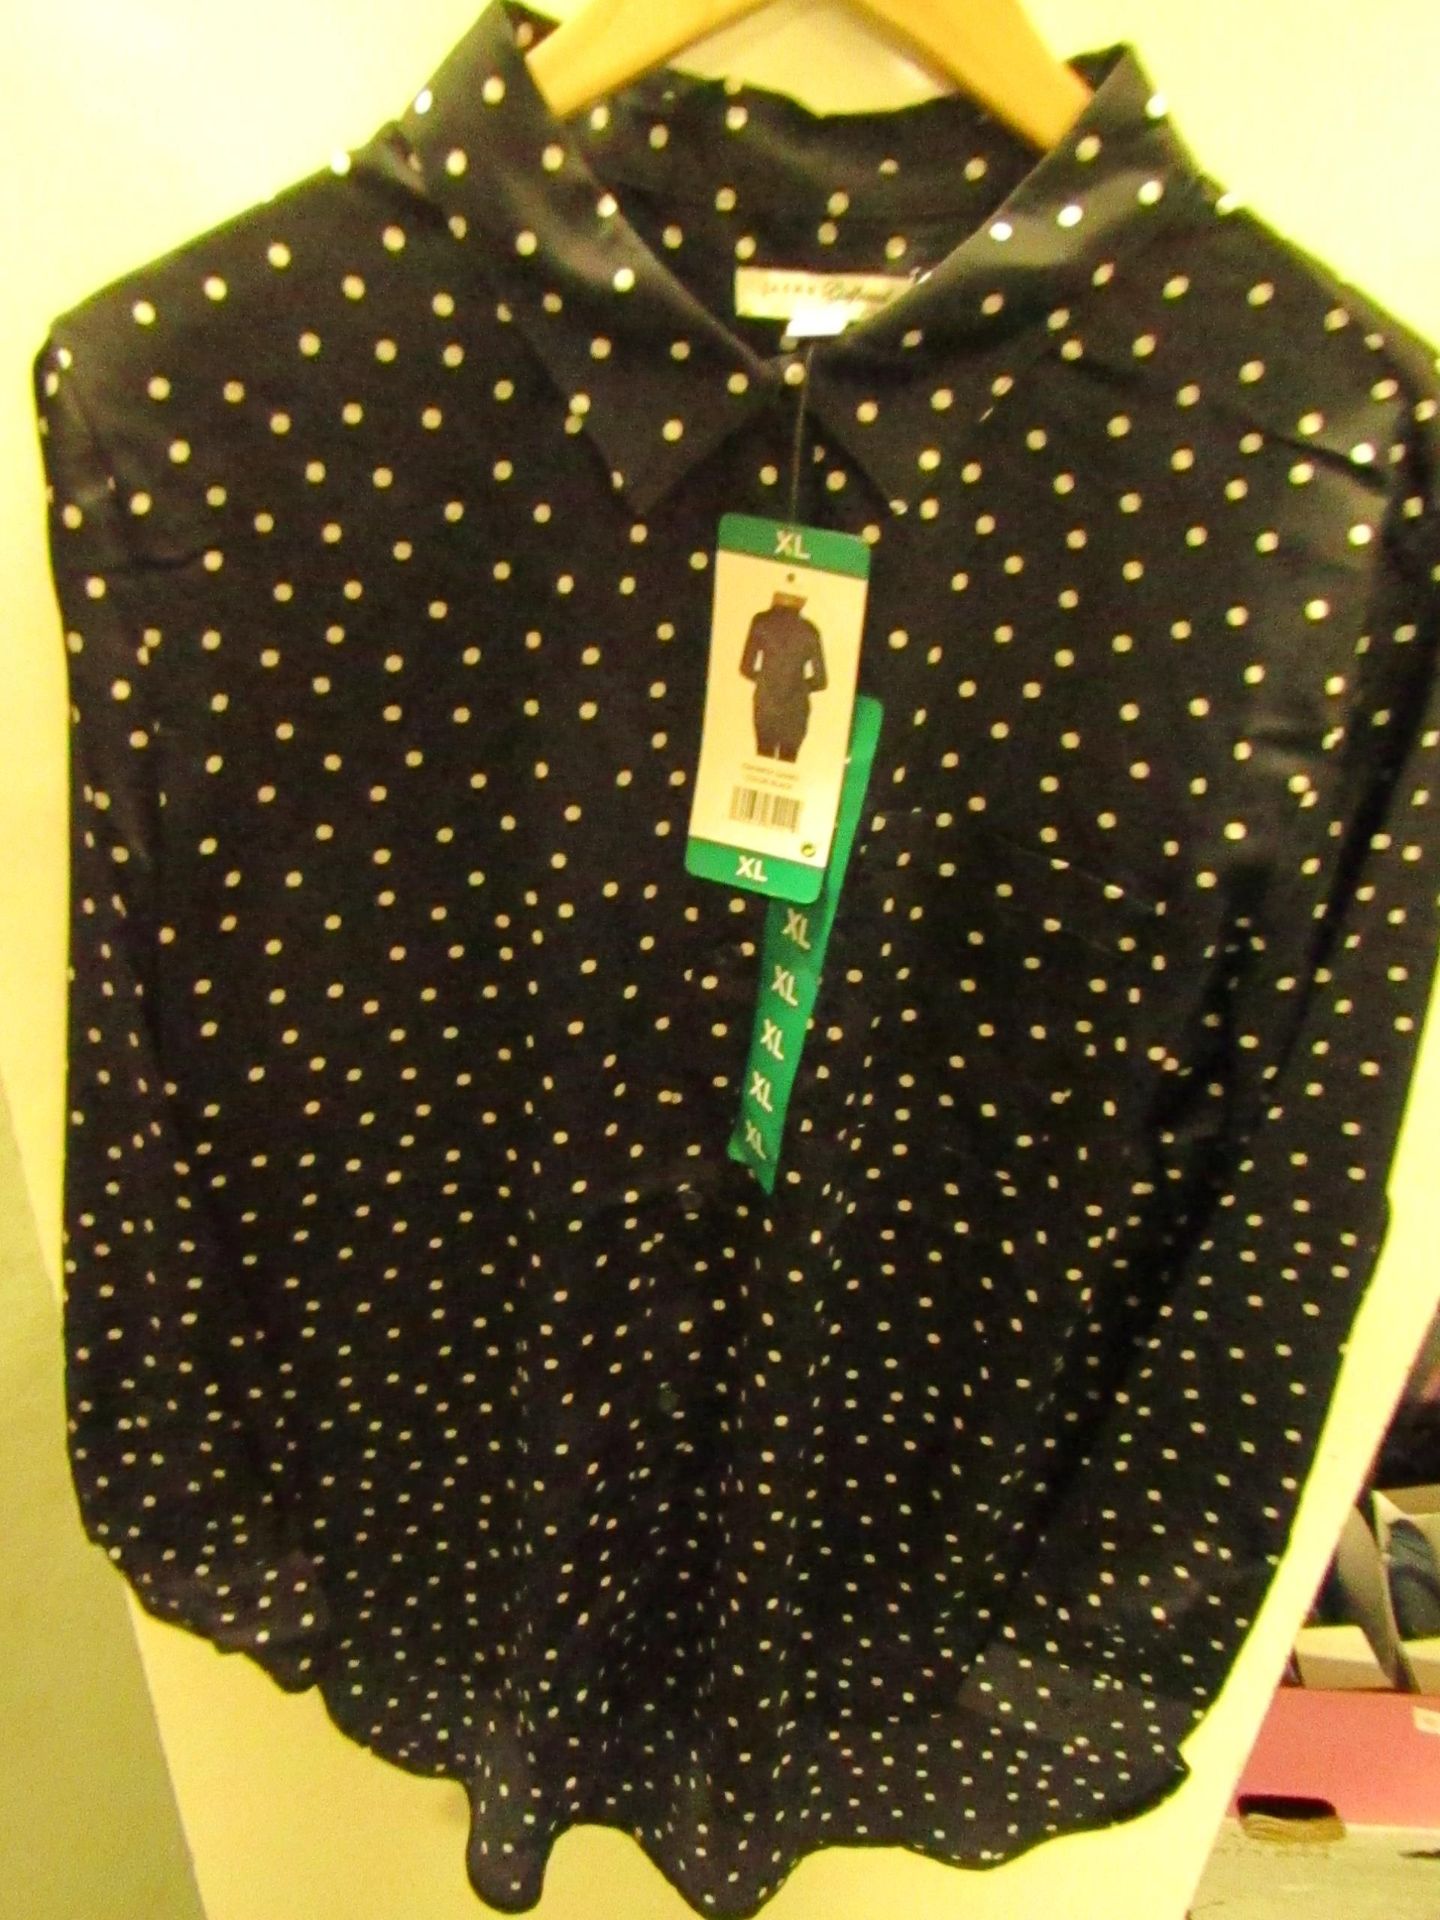 Jachs New York Girlfriends Blouse,Black/White Spots - Size X/L New With Tags